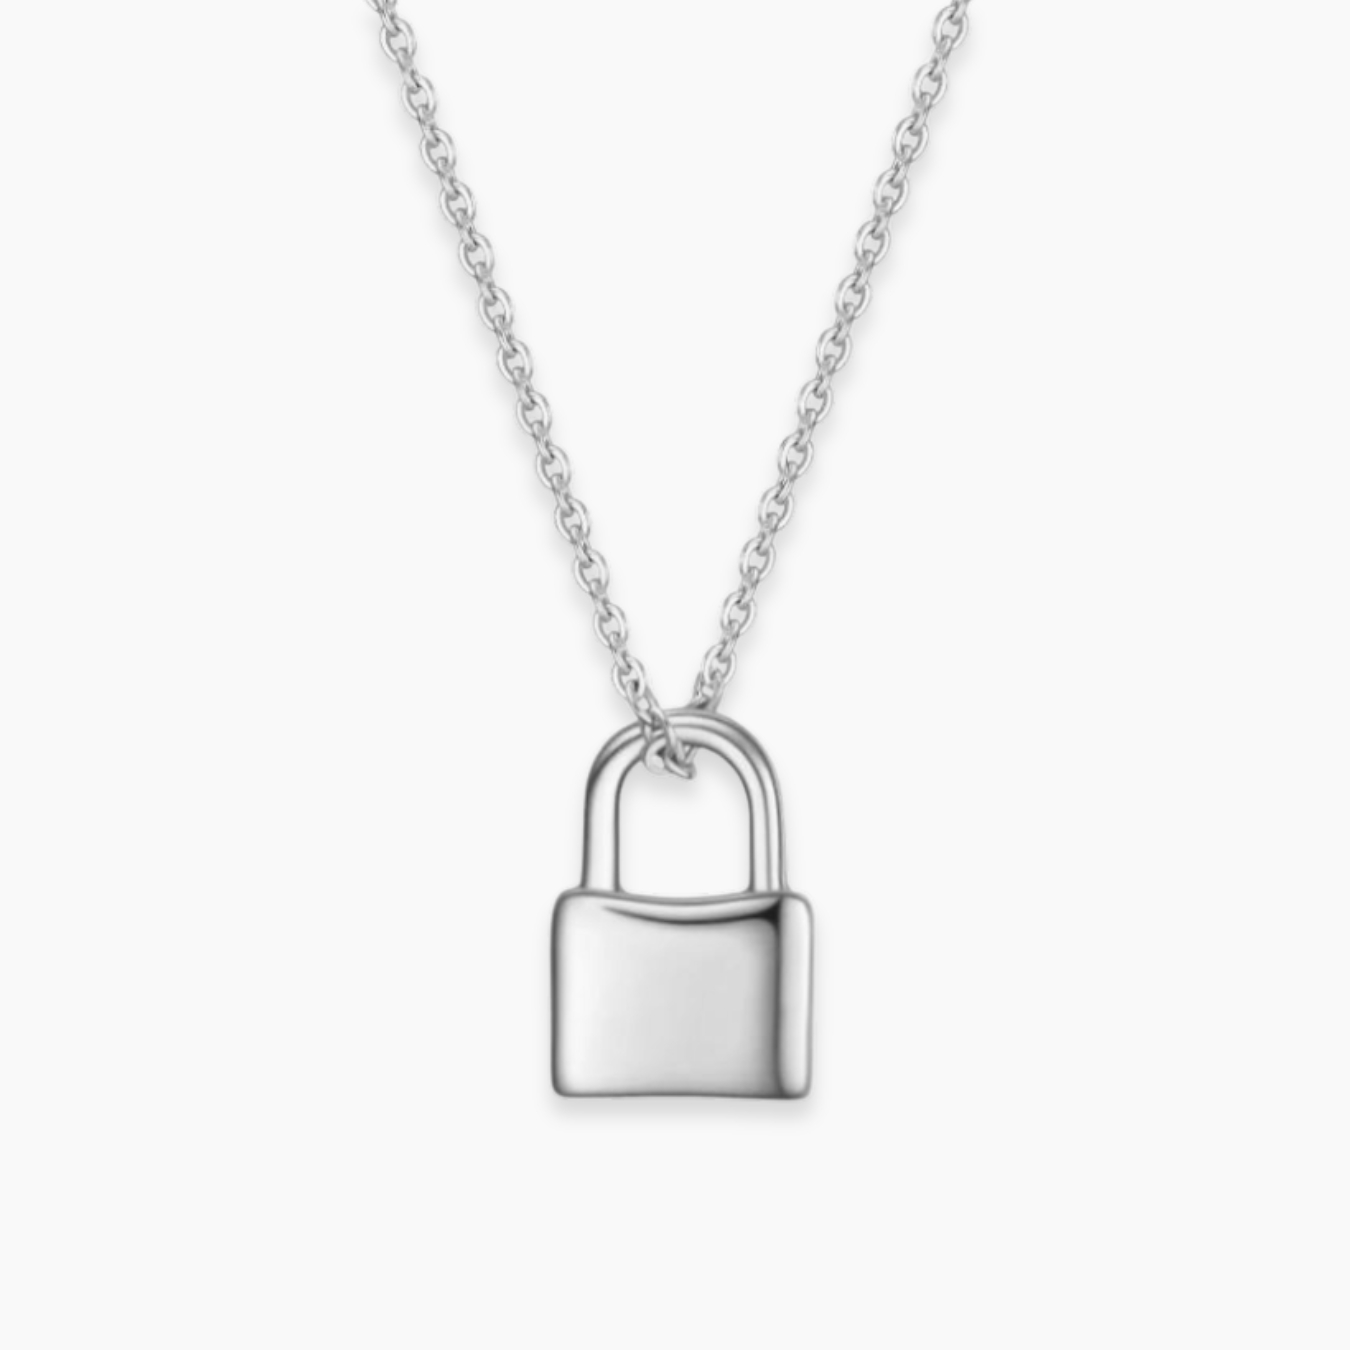 LOCK Personalizable Necklace | Initials